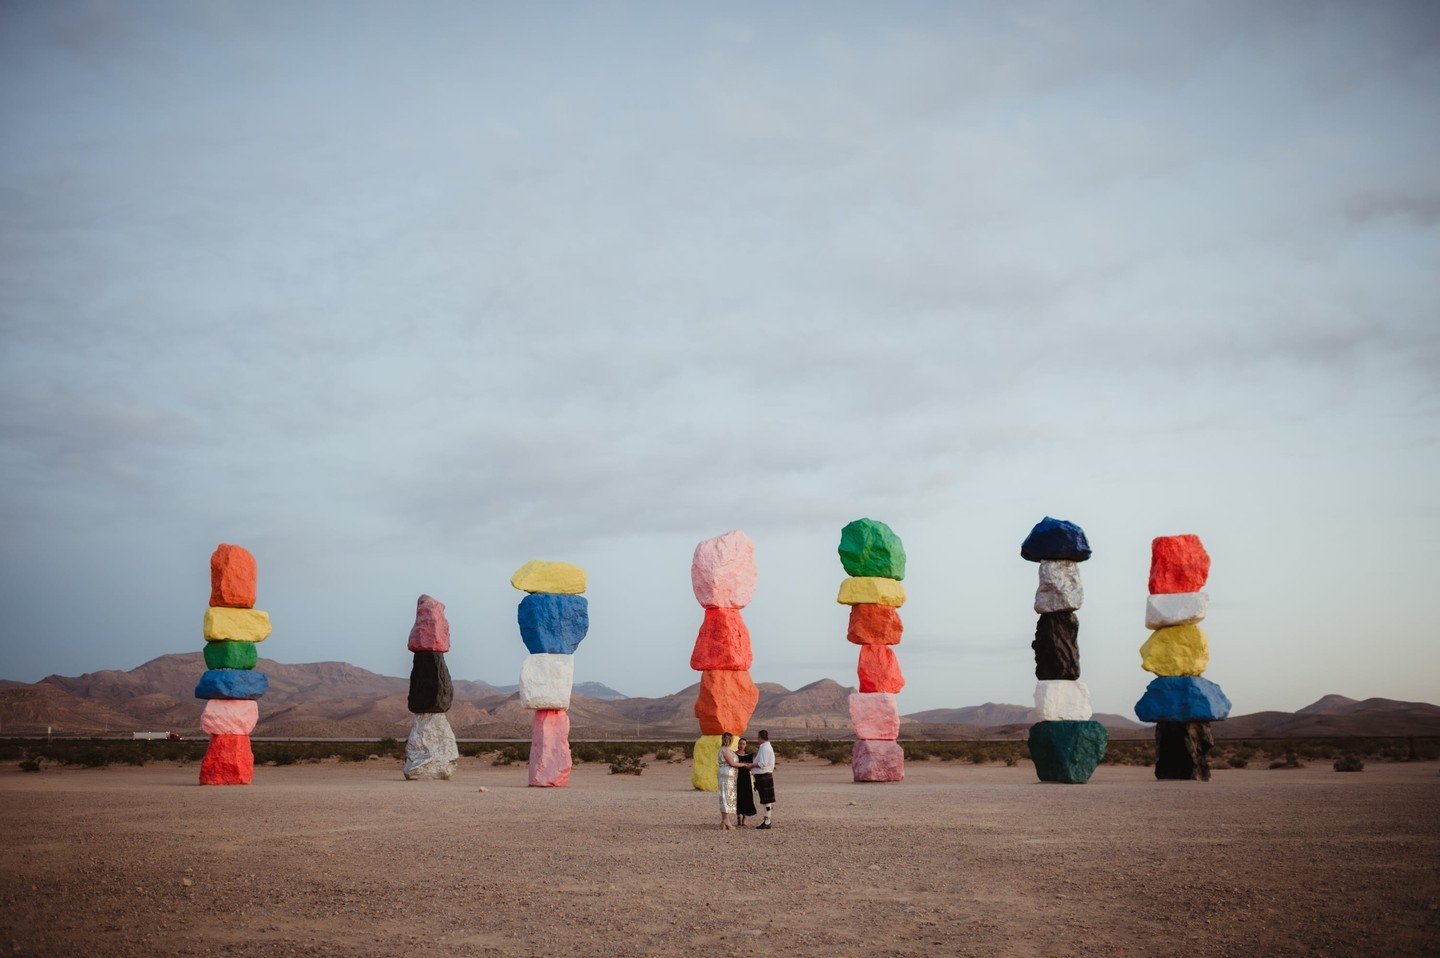 Take a wild guess at how we saw the Seven Magic Mountains this empty.⁣
⁣
Hint: it's not photoshop.⁣
⁣
Answer: it's sunrise. We woke up around 4 a.m. to meet in the middle of the desert for first light. Not only did we end up avoiding the blistering V